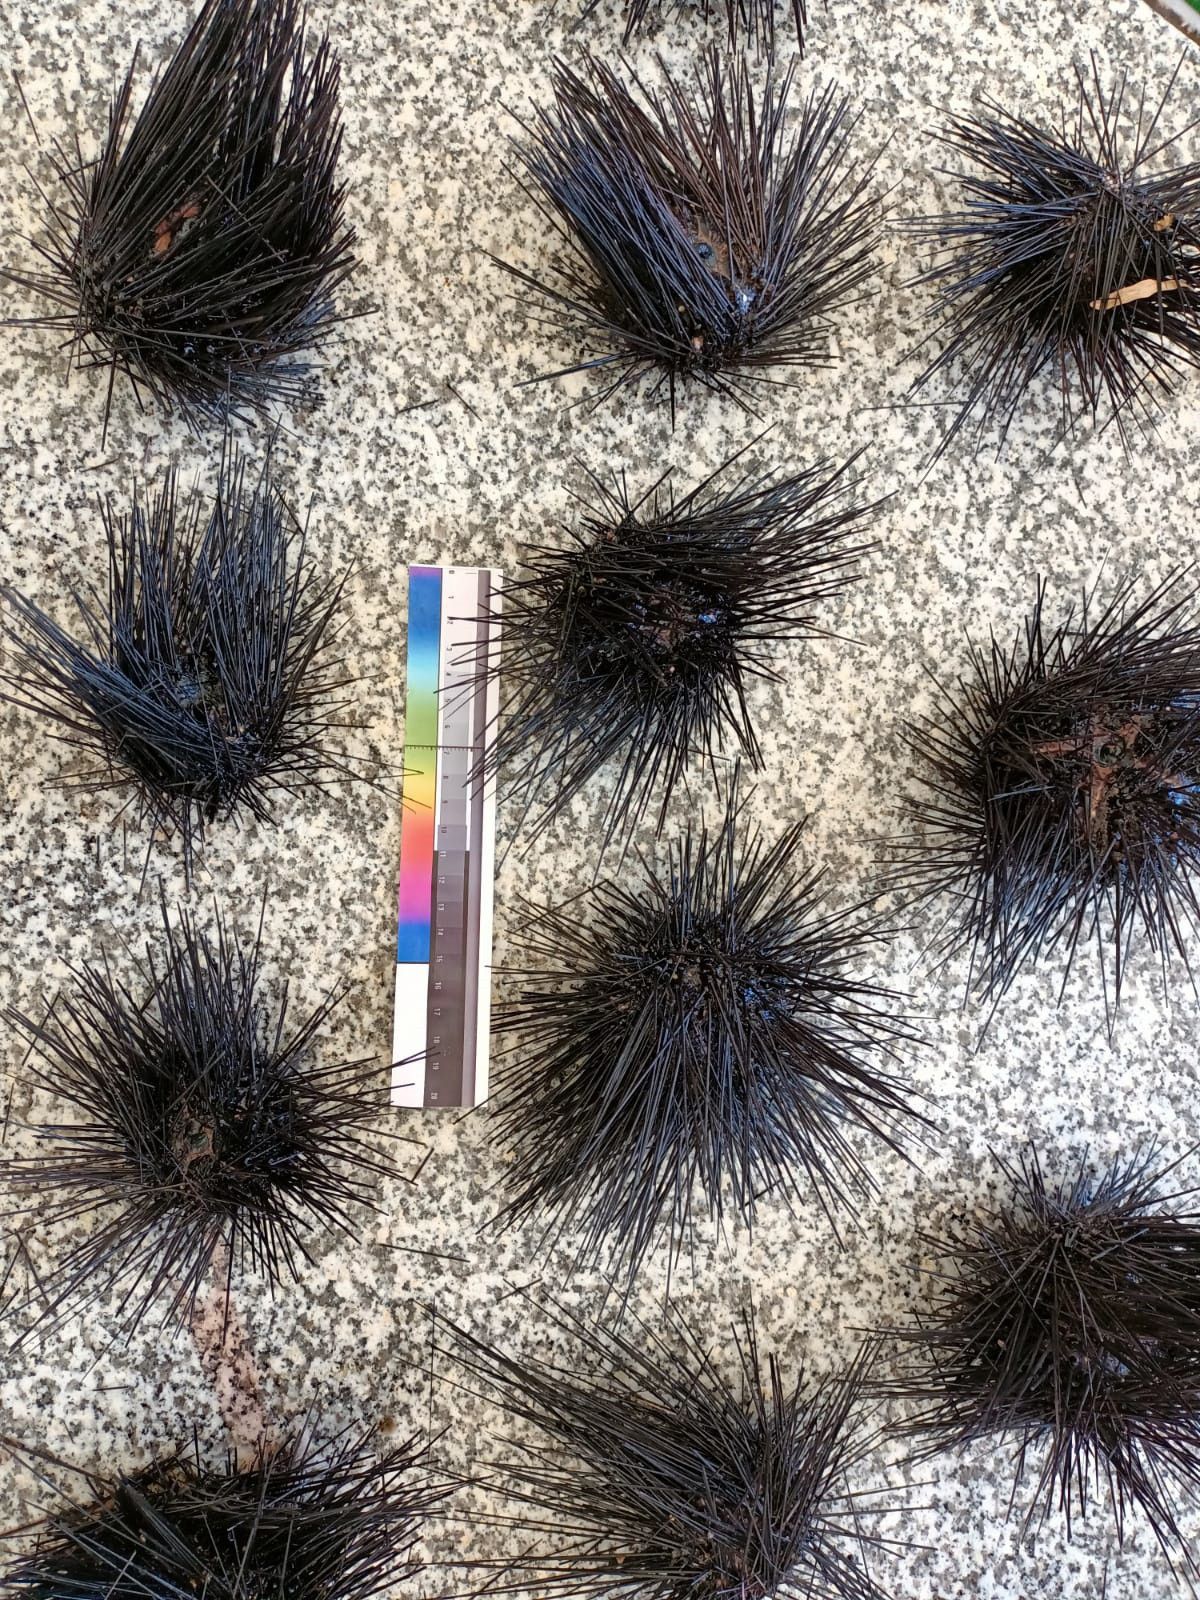 Toxic invasive sea urchins exported to Italy #1